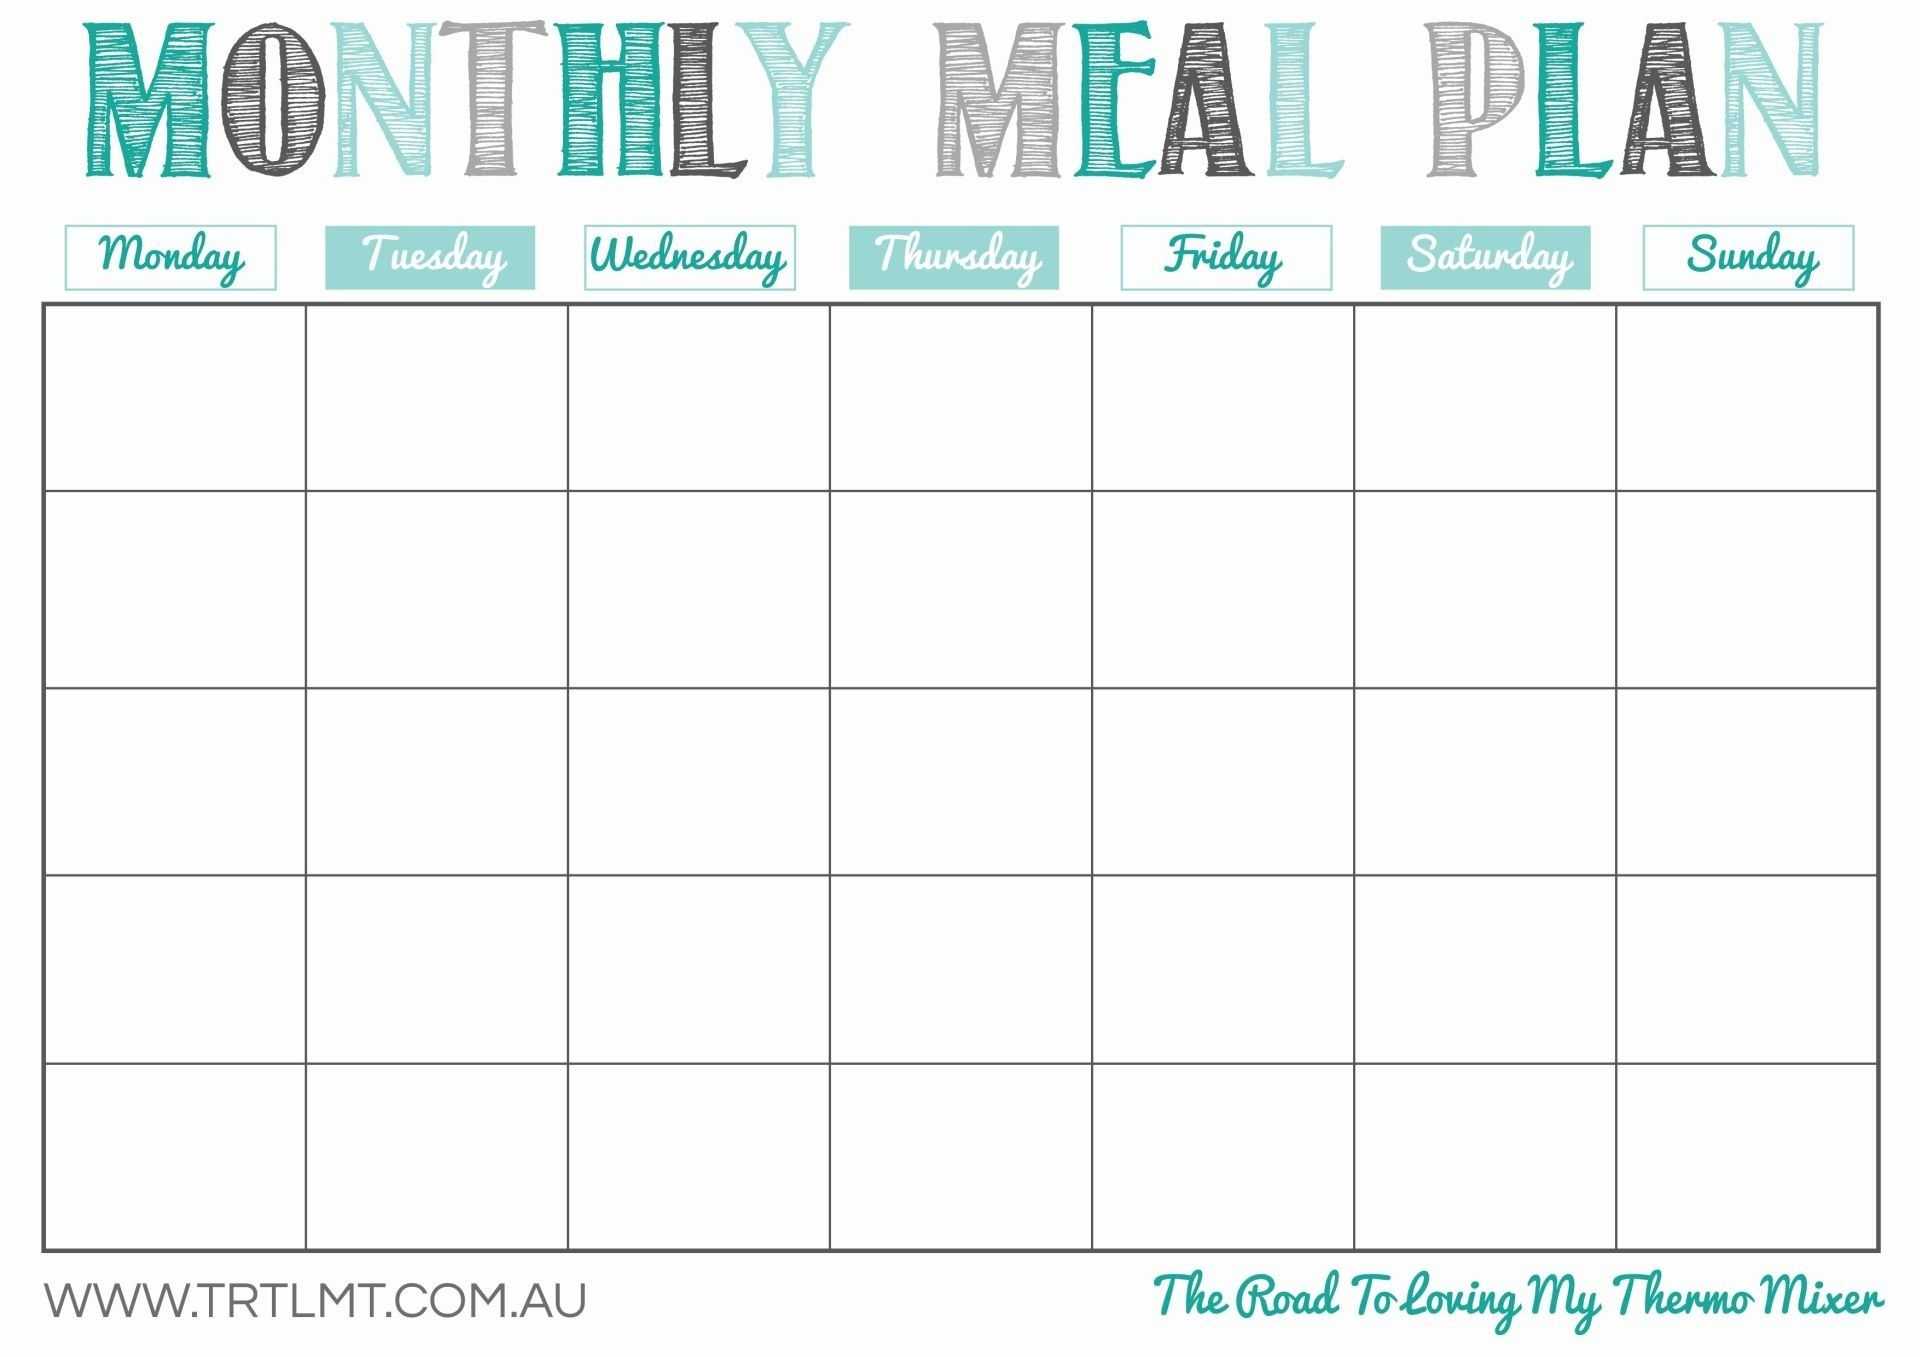 Monthly Meal Plan Printable | Template Business Psd, Excel Throughout Meal Plan Template Word